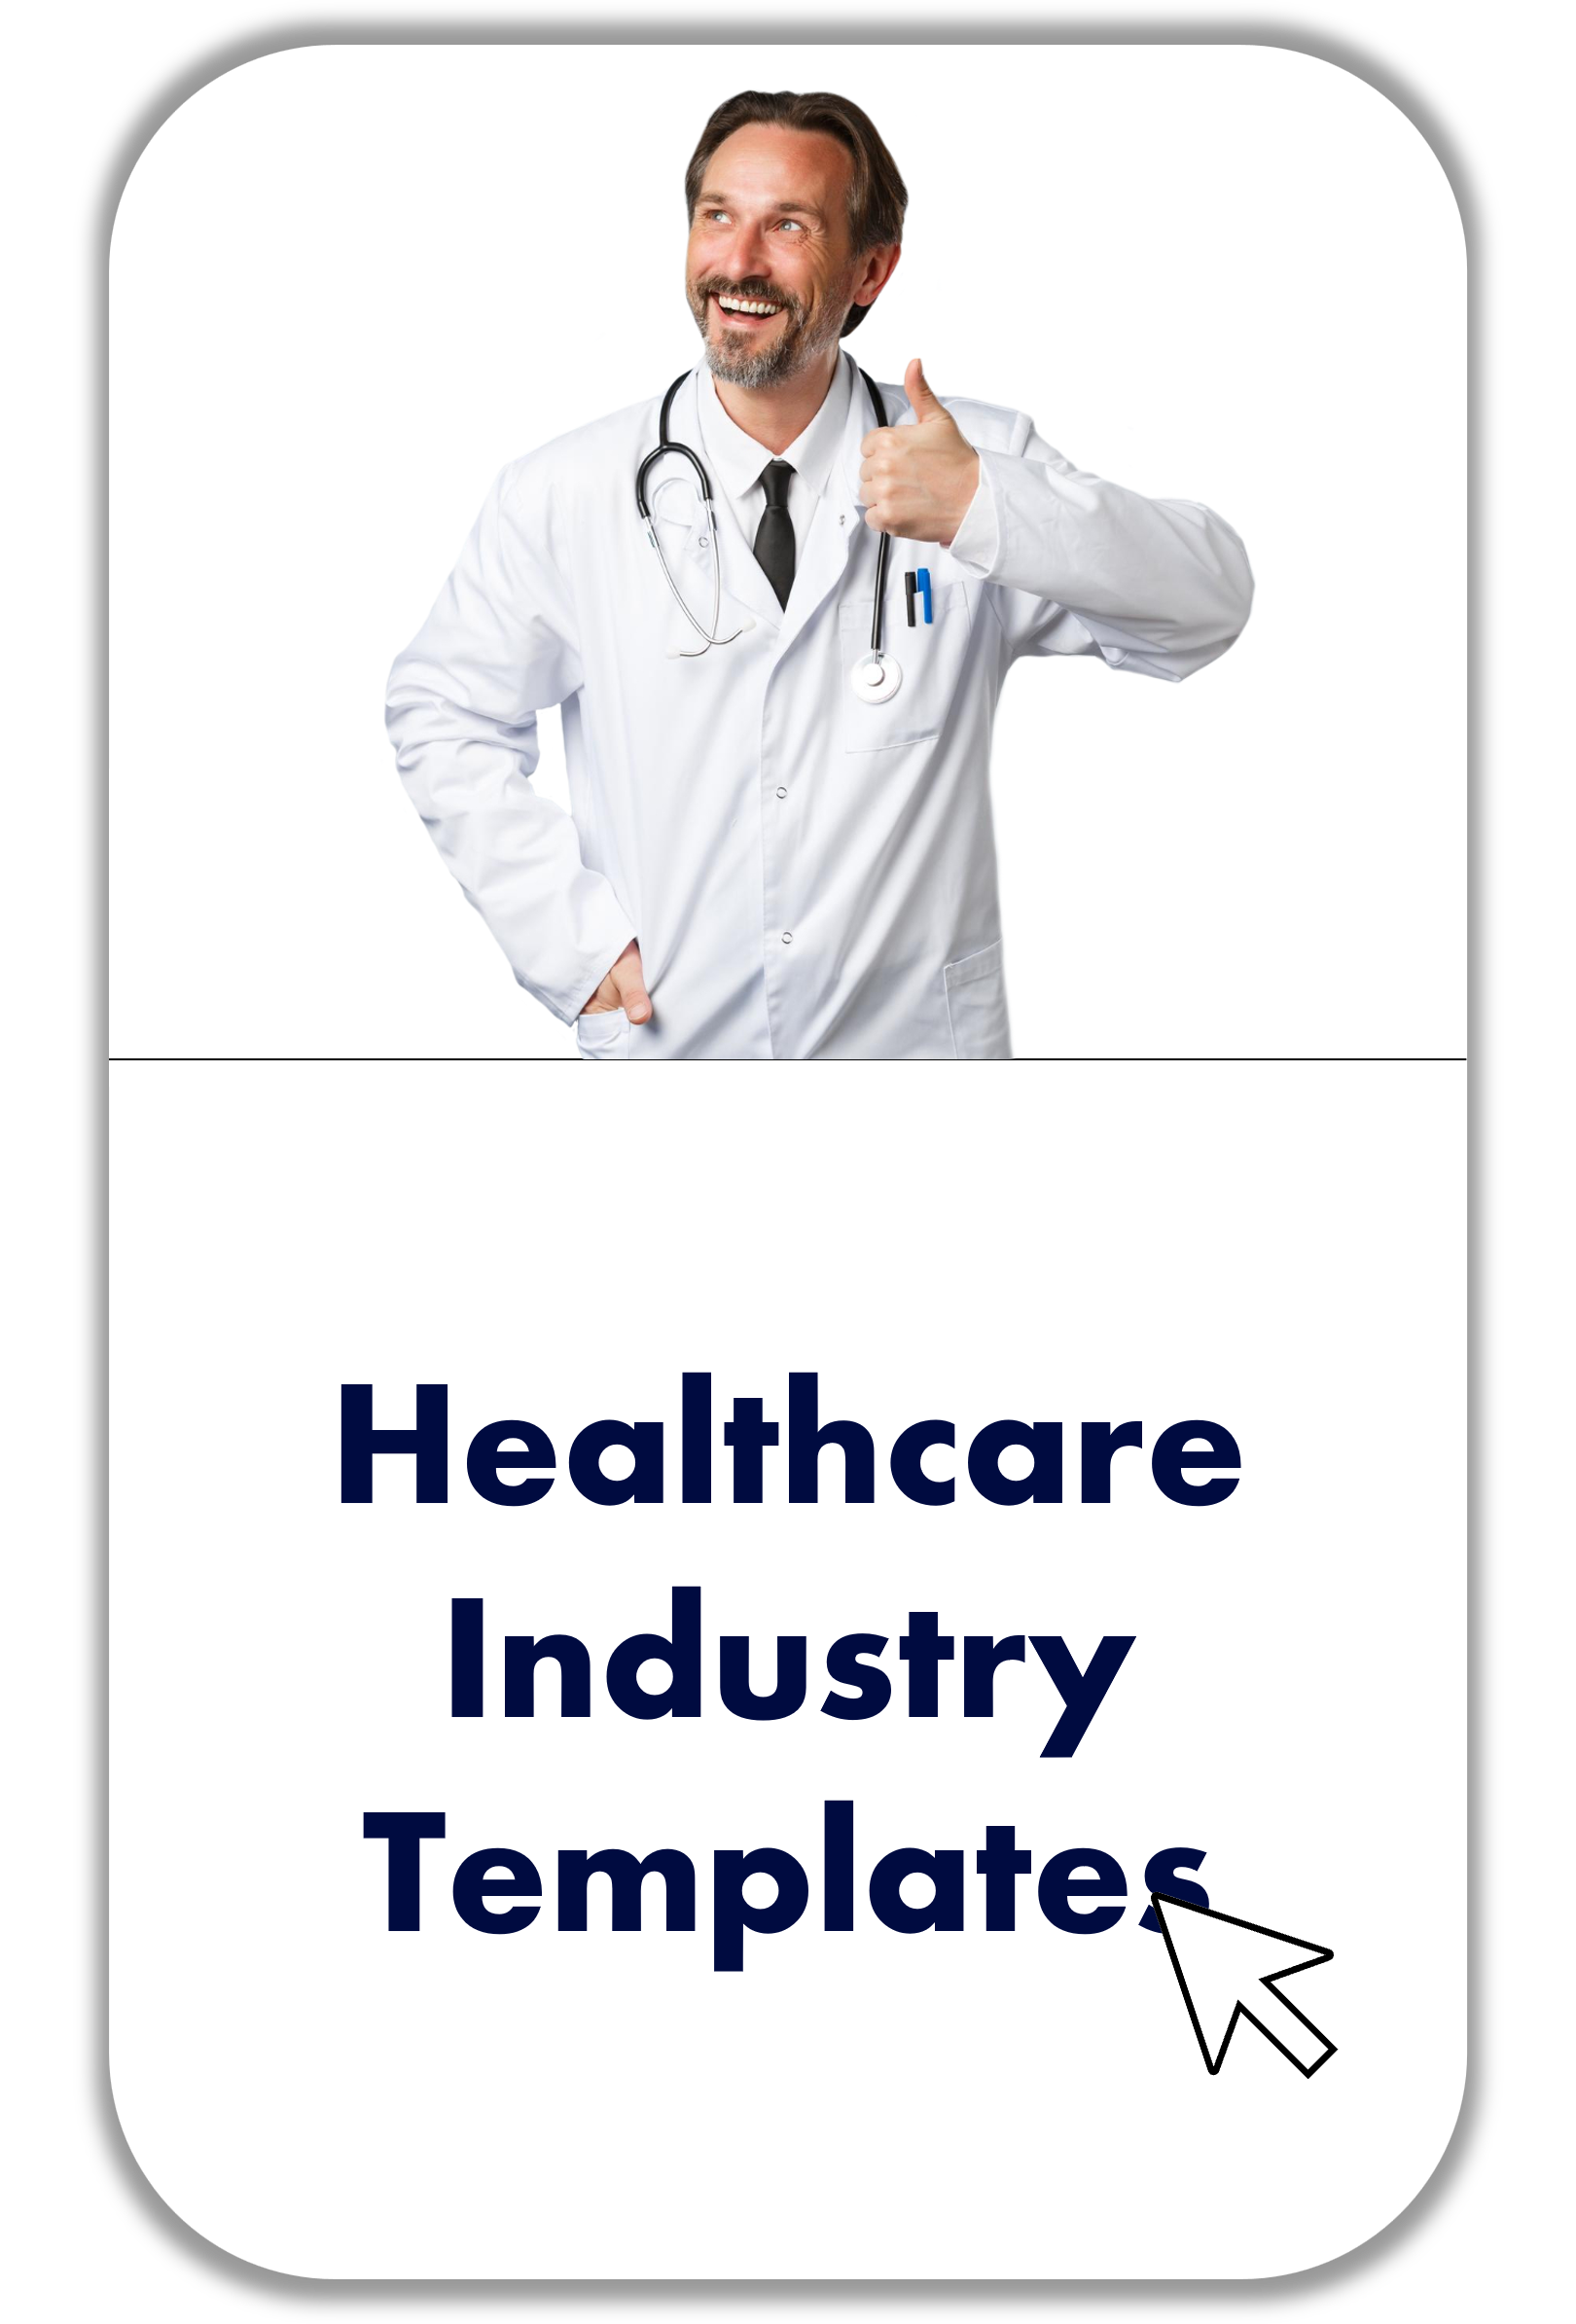 Healthcare Industry Templates